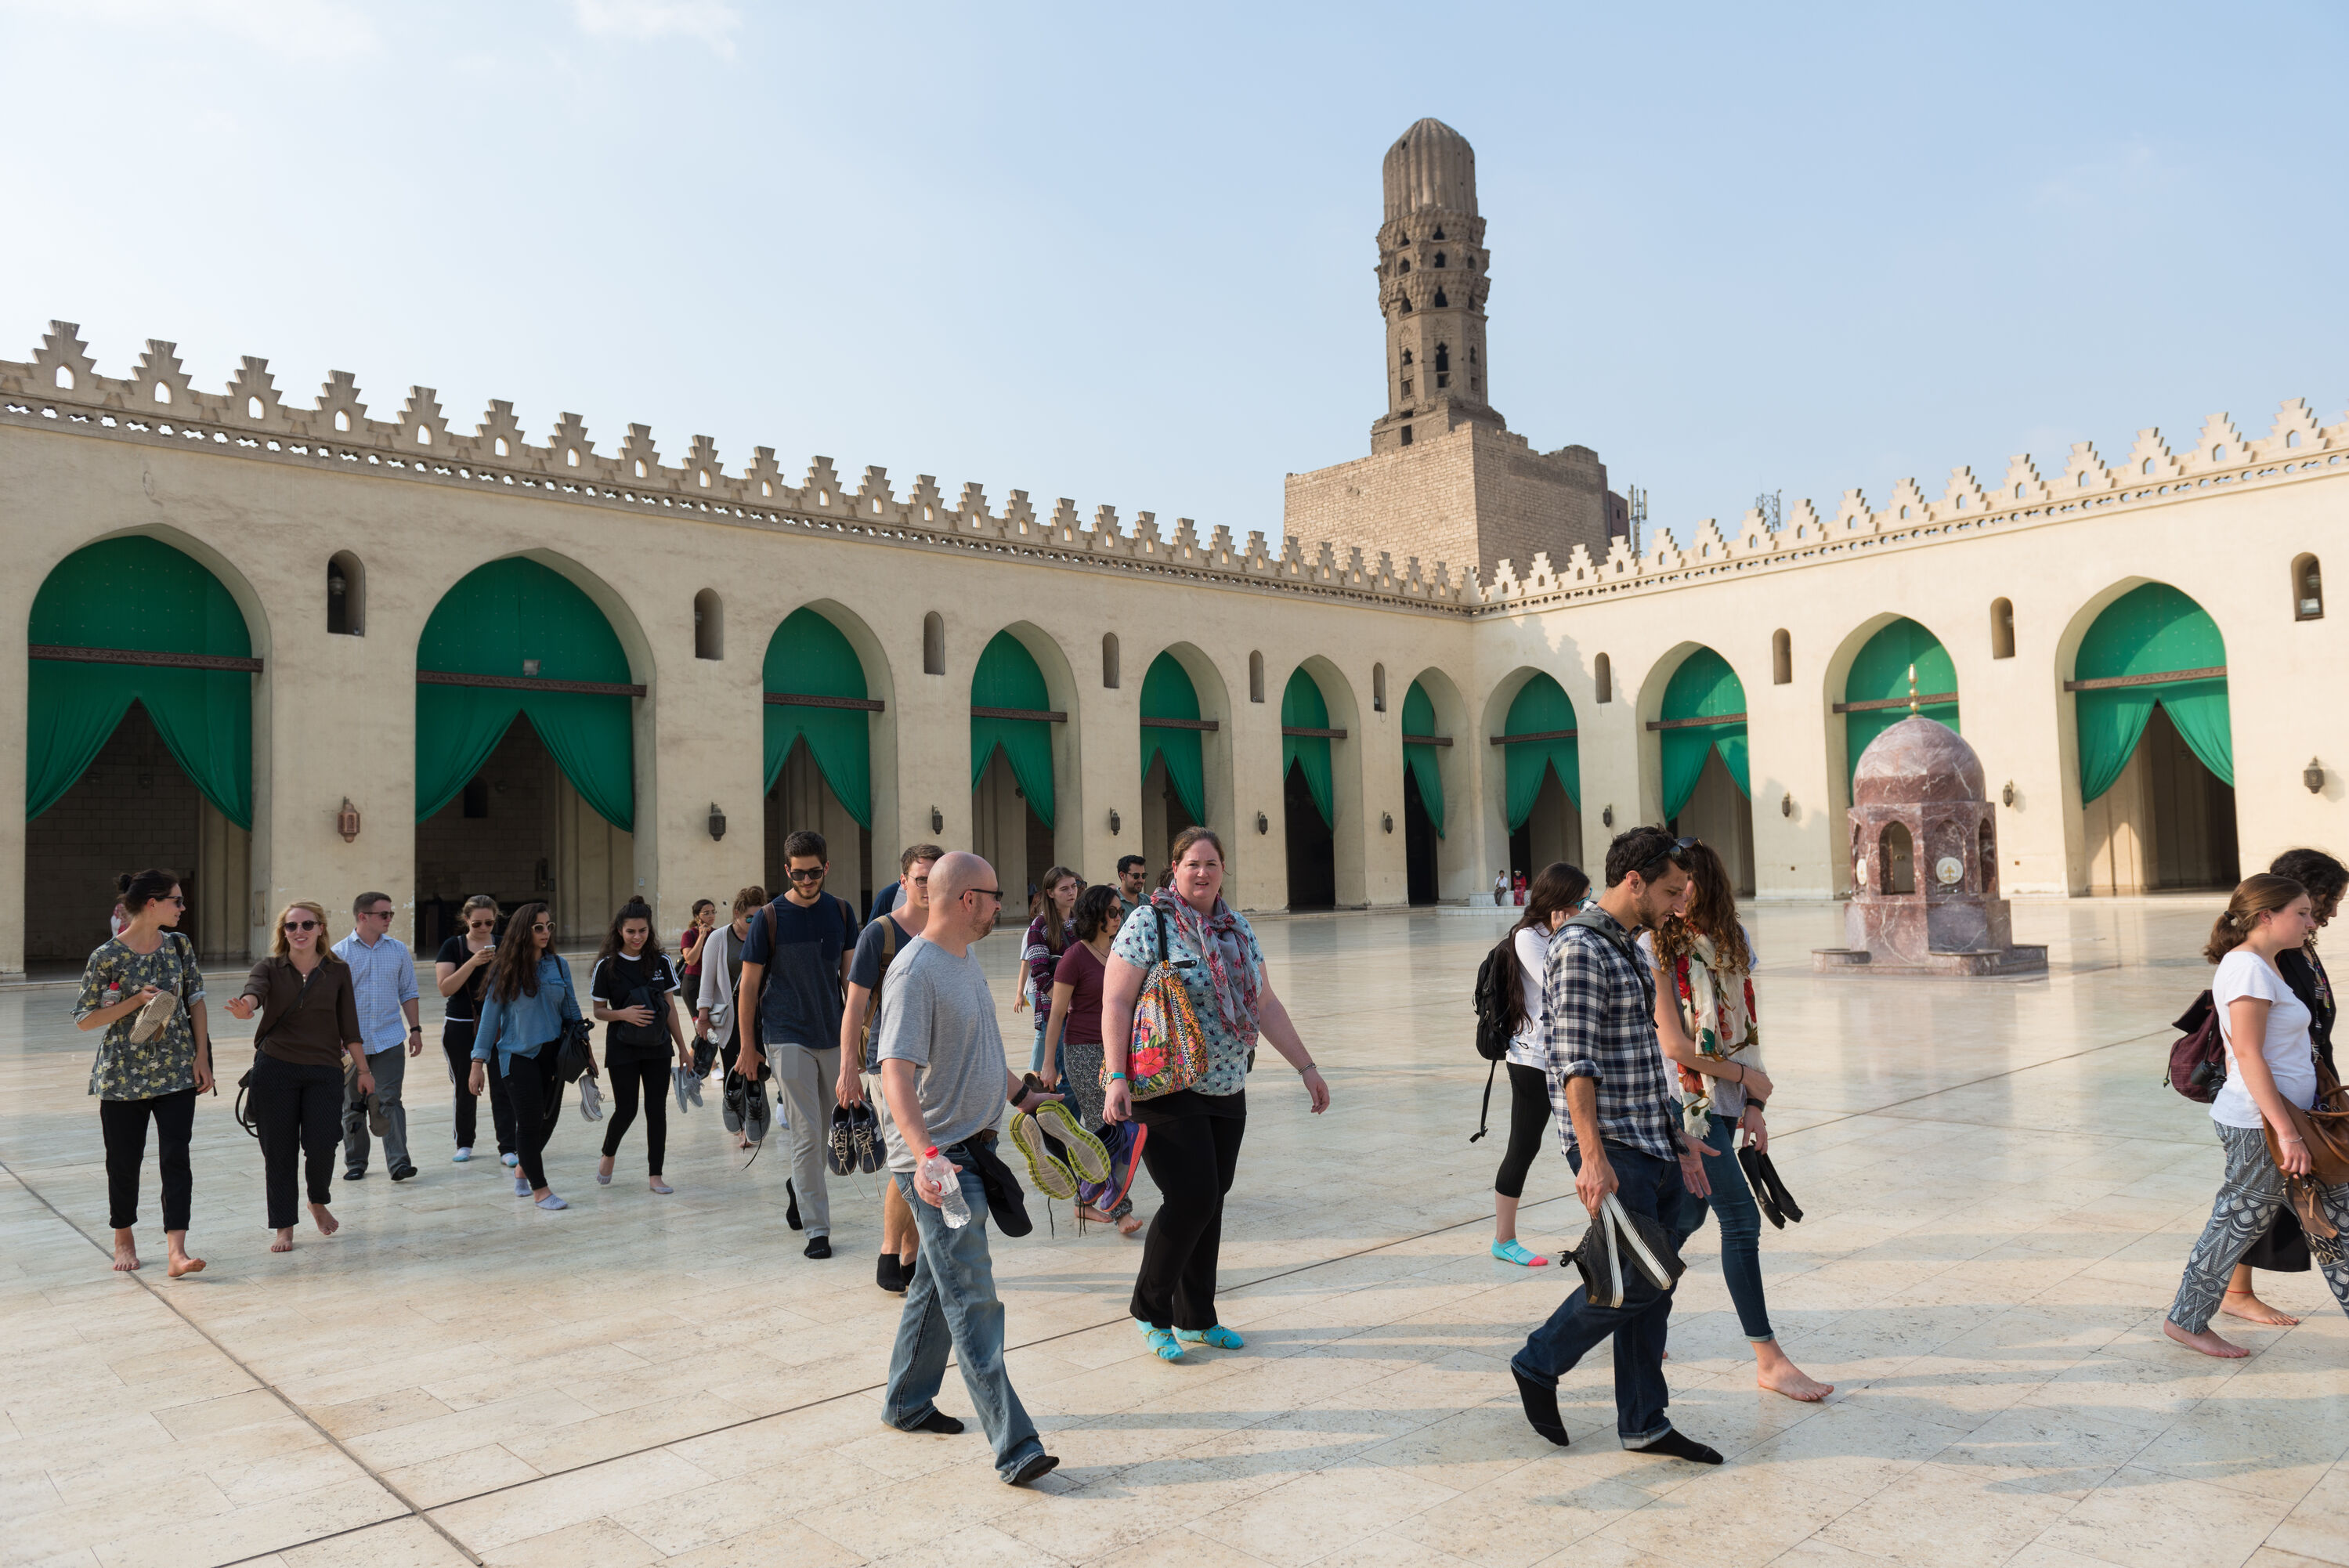 Group of international students walking in a mosque's open area holding their shoes